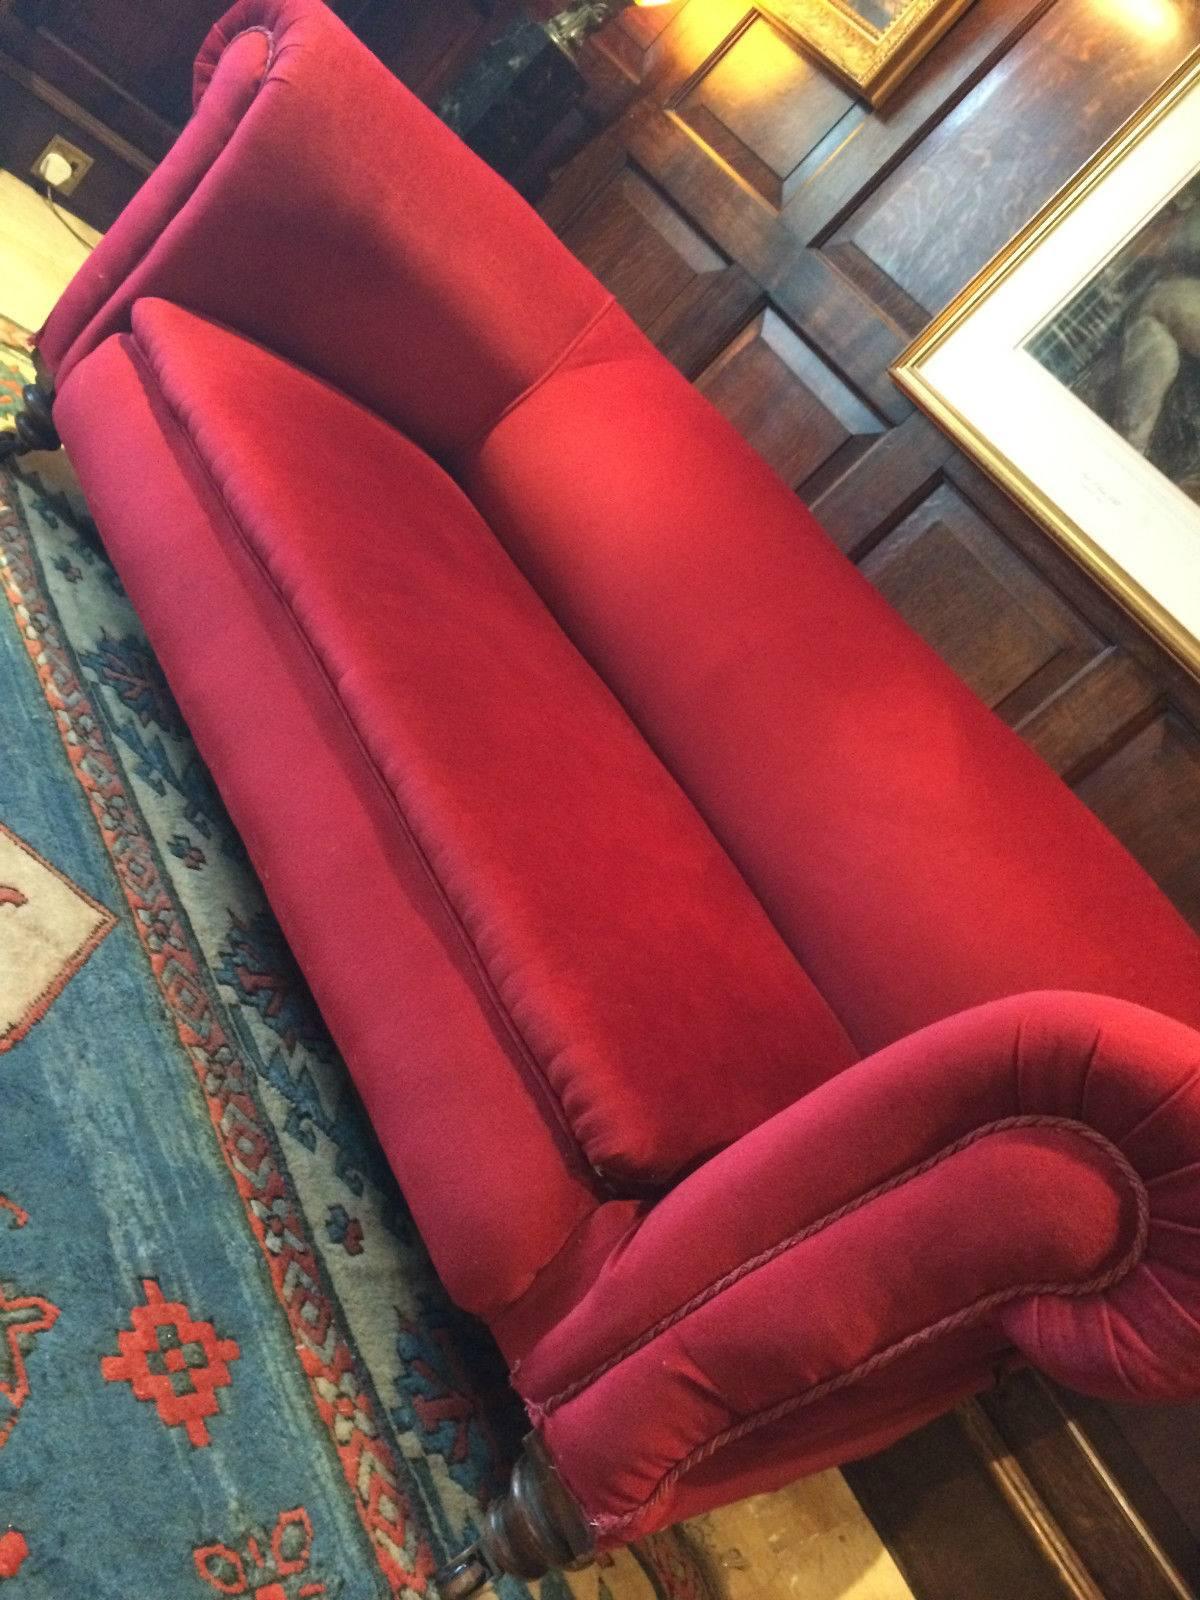 A beautiful antique Victorian Chesterfield three-seat sofa recently reupholstered in lush 'Scarlet Red' velvet material, the sofa has a lever to the right allowing the right arm to drop at adjustable heights, offered in excellent condition, sitting